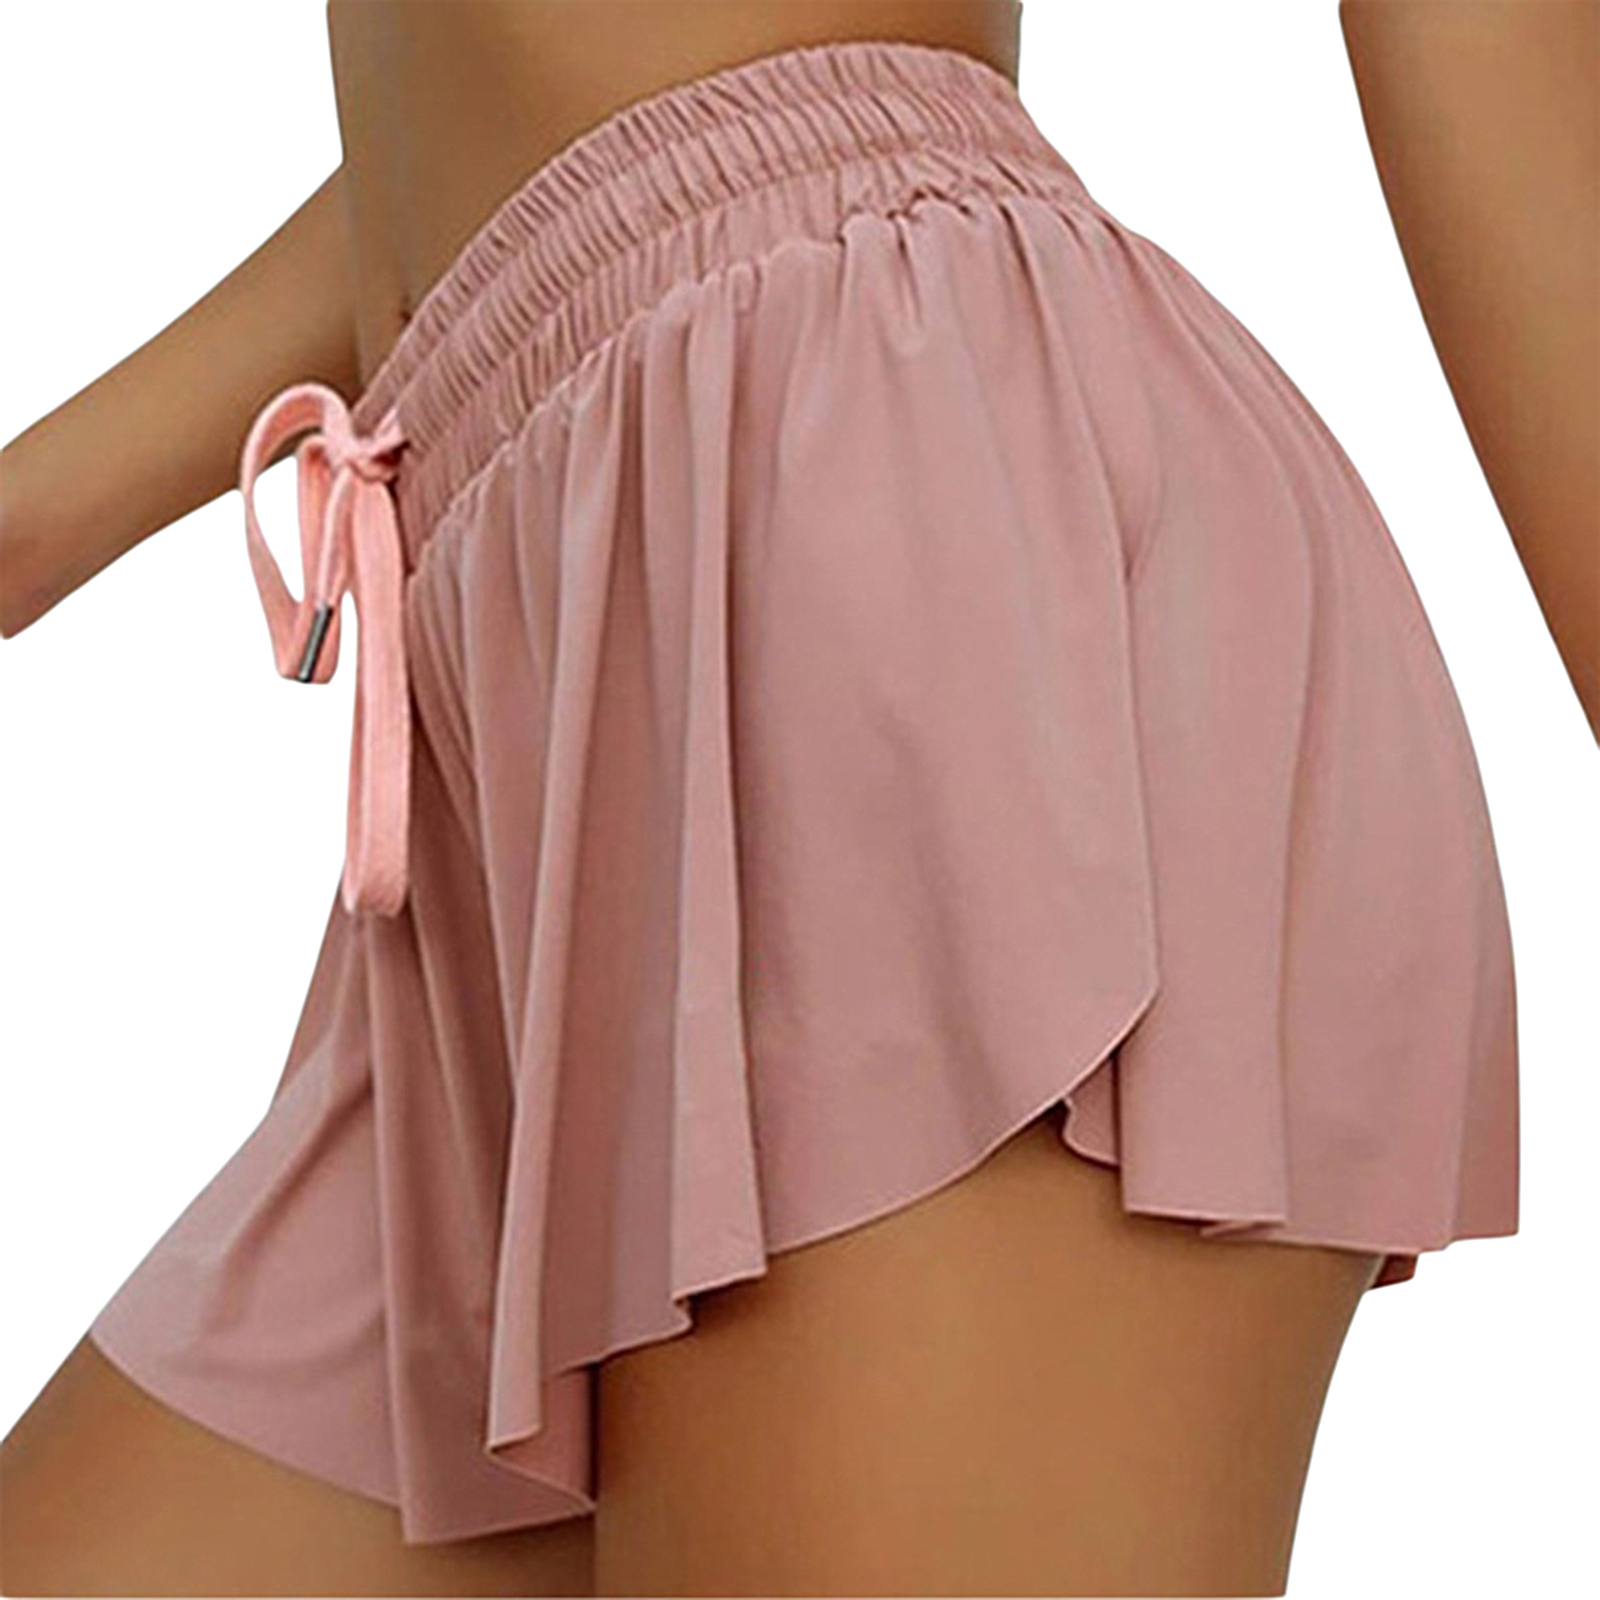 Solid Color Elastic High Waist Skirt with Built-in Slip Shorts FOCUSNORM Women Summer Simple Style Sports Skort 